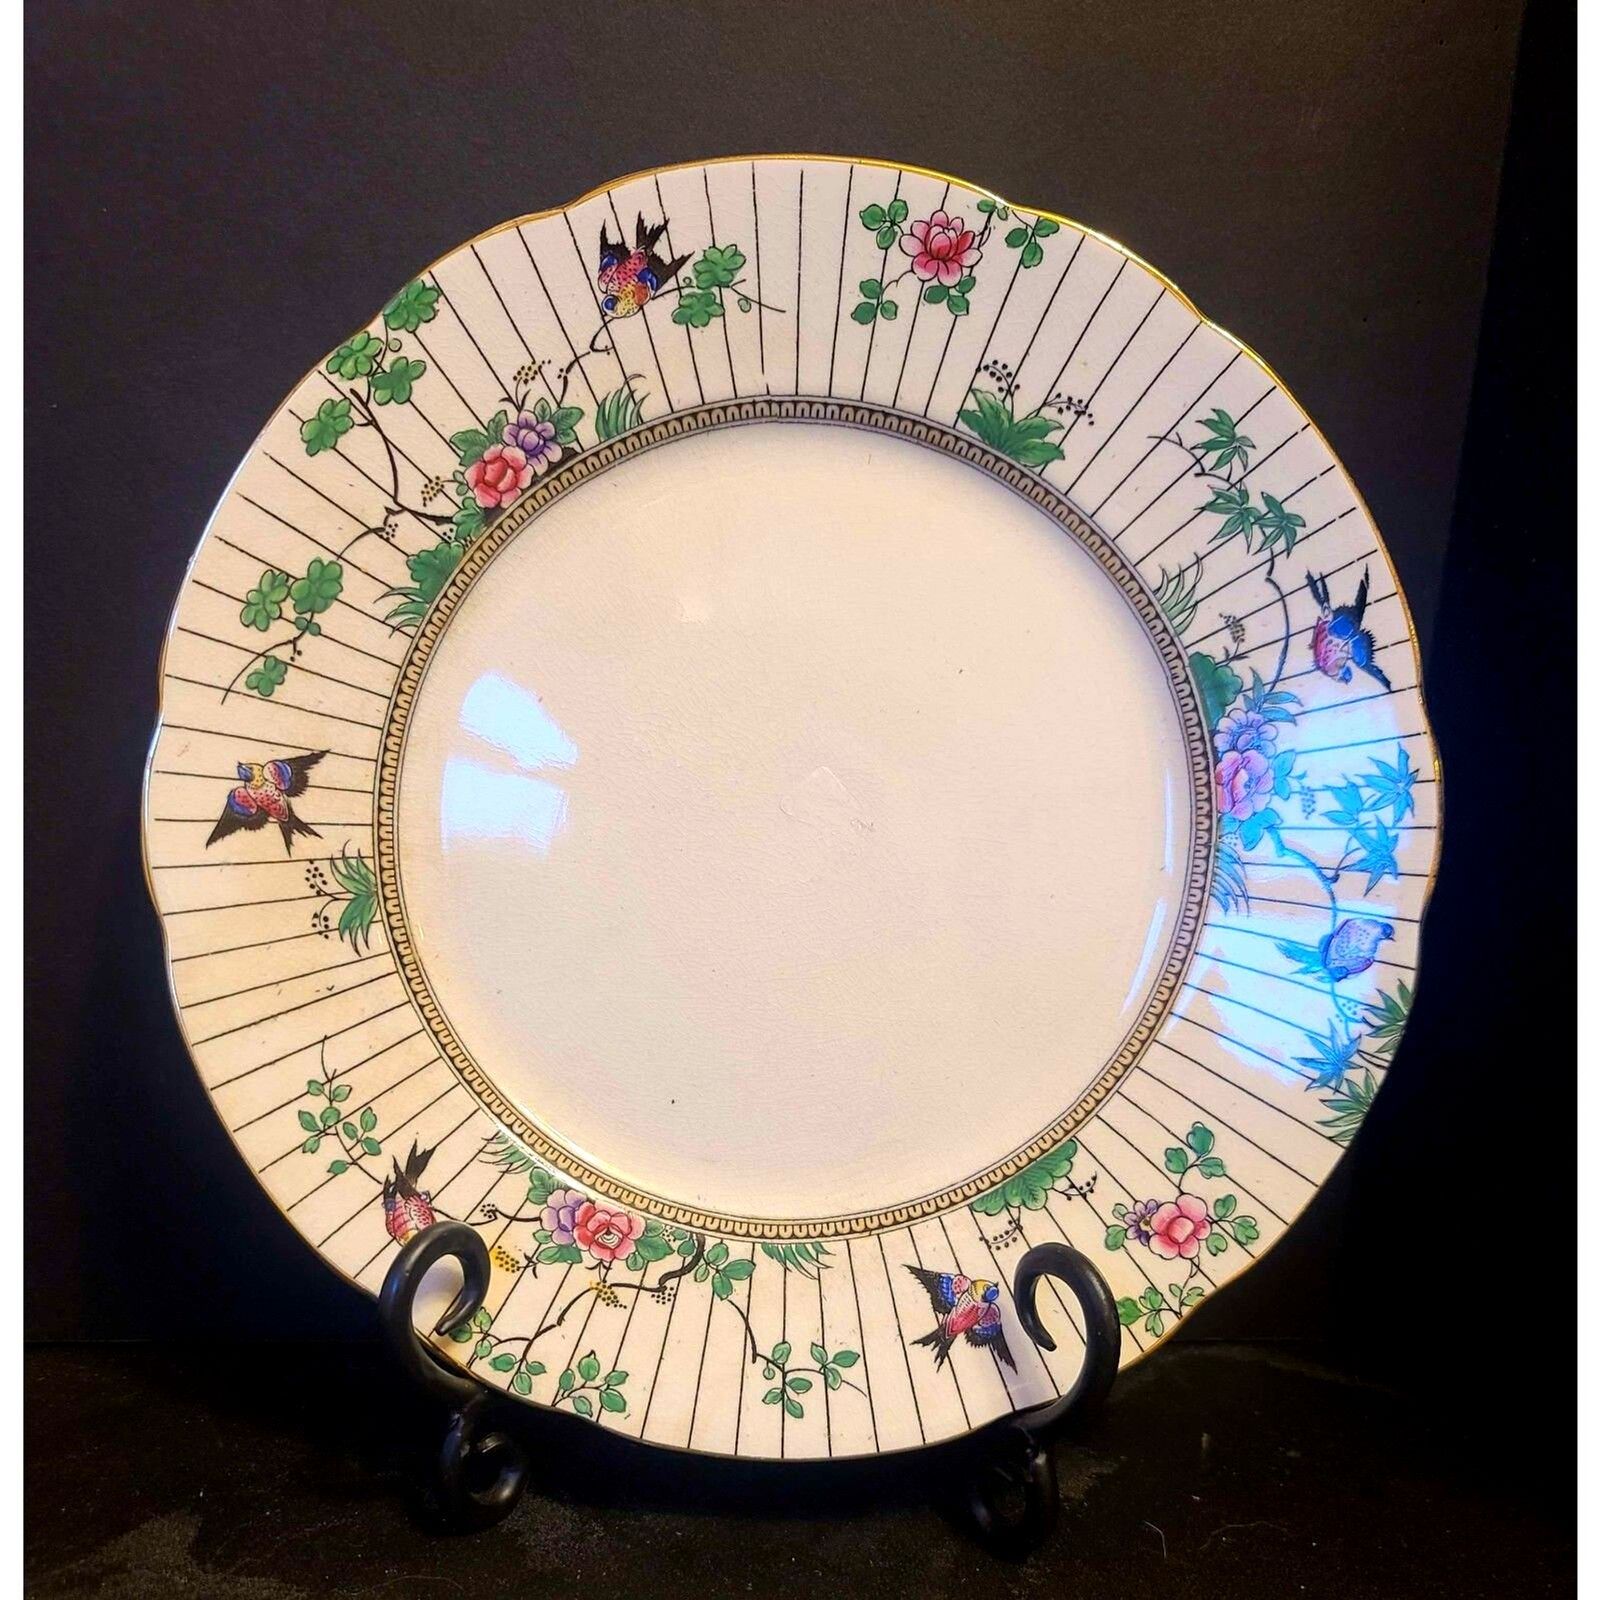 Vintage Booths Silicon China England Springtime 10” Dinner Plates 1930s 3ct.